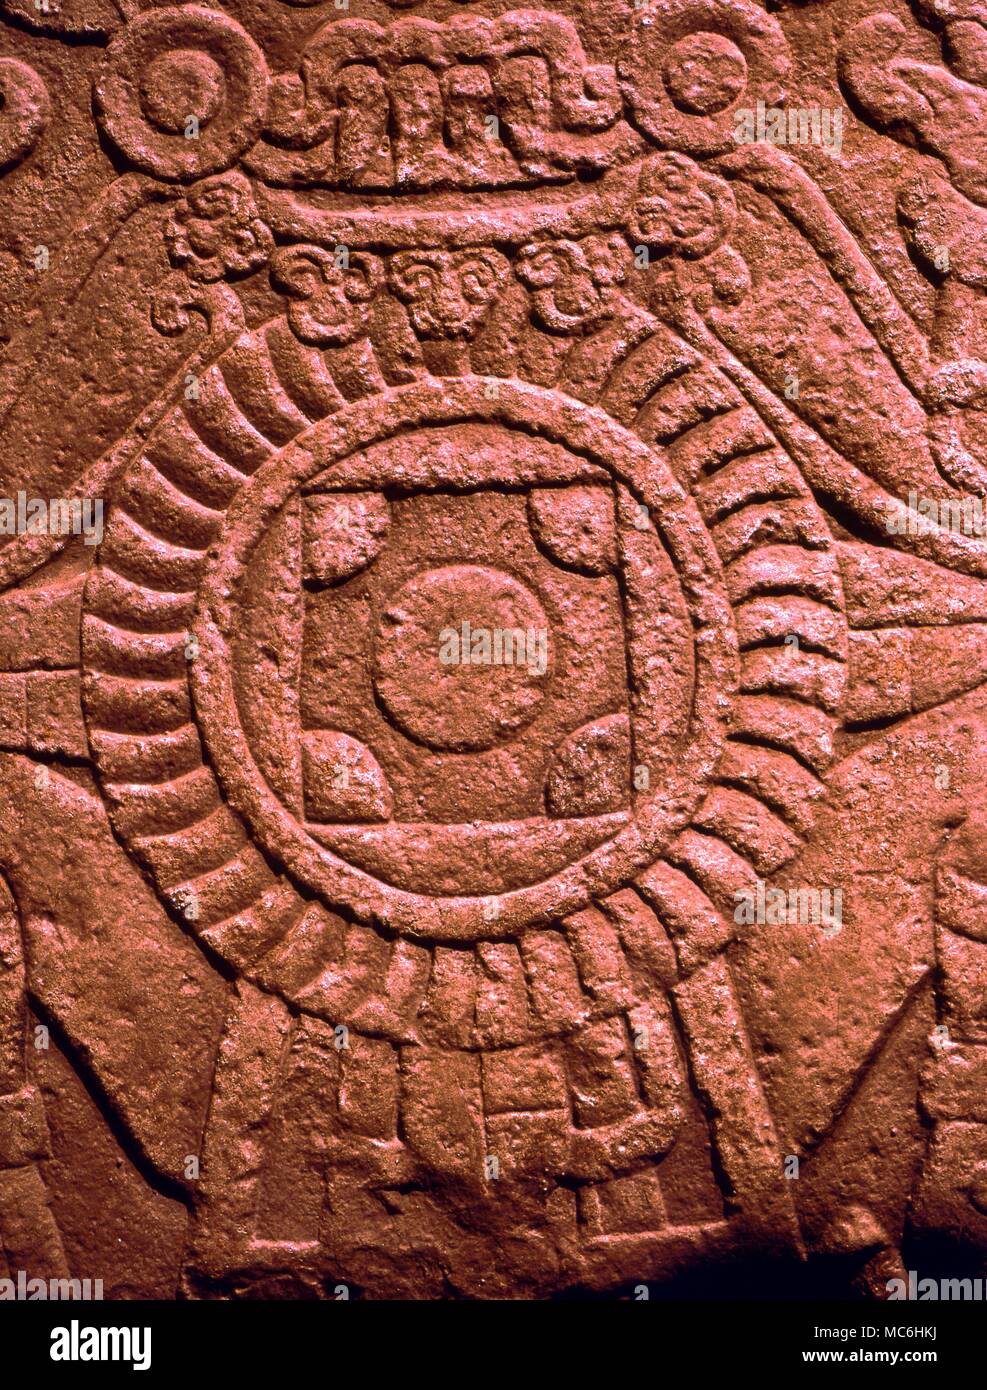 Omphalos image of the 'naval'' glyph on the stone on which the Aztec goddess Coaticue stood. National Anthropological Museum, Mexico City.' Stock Photo